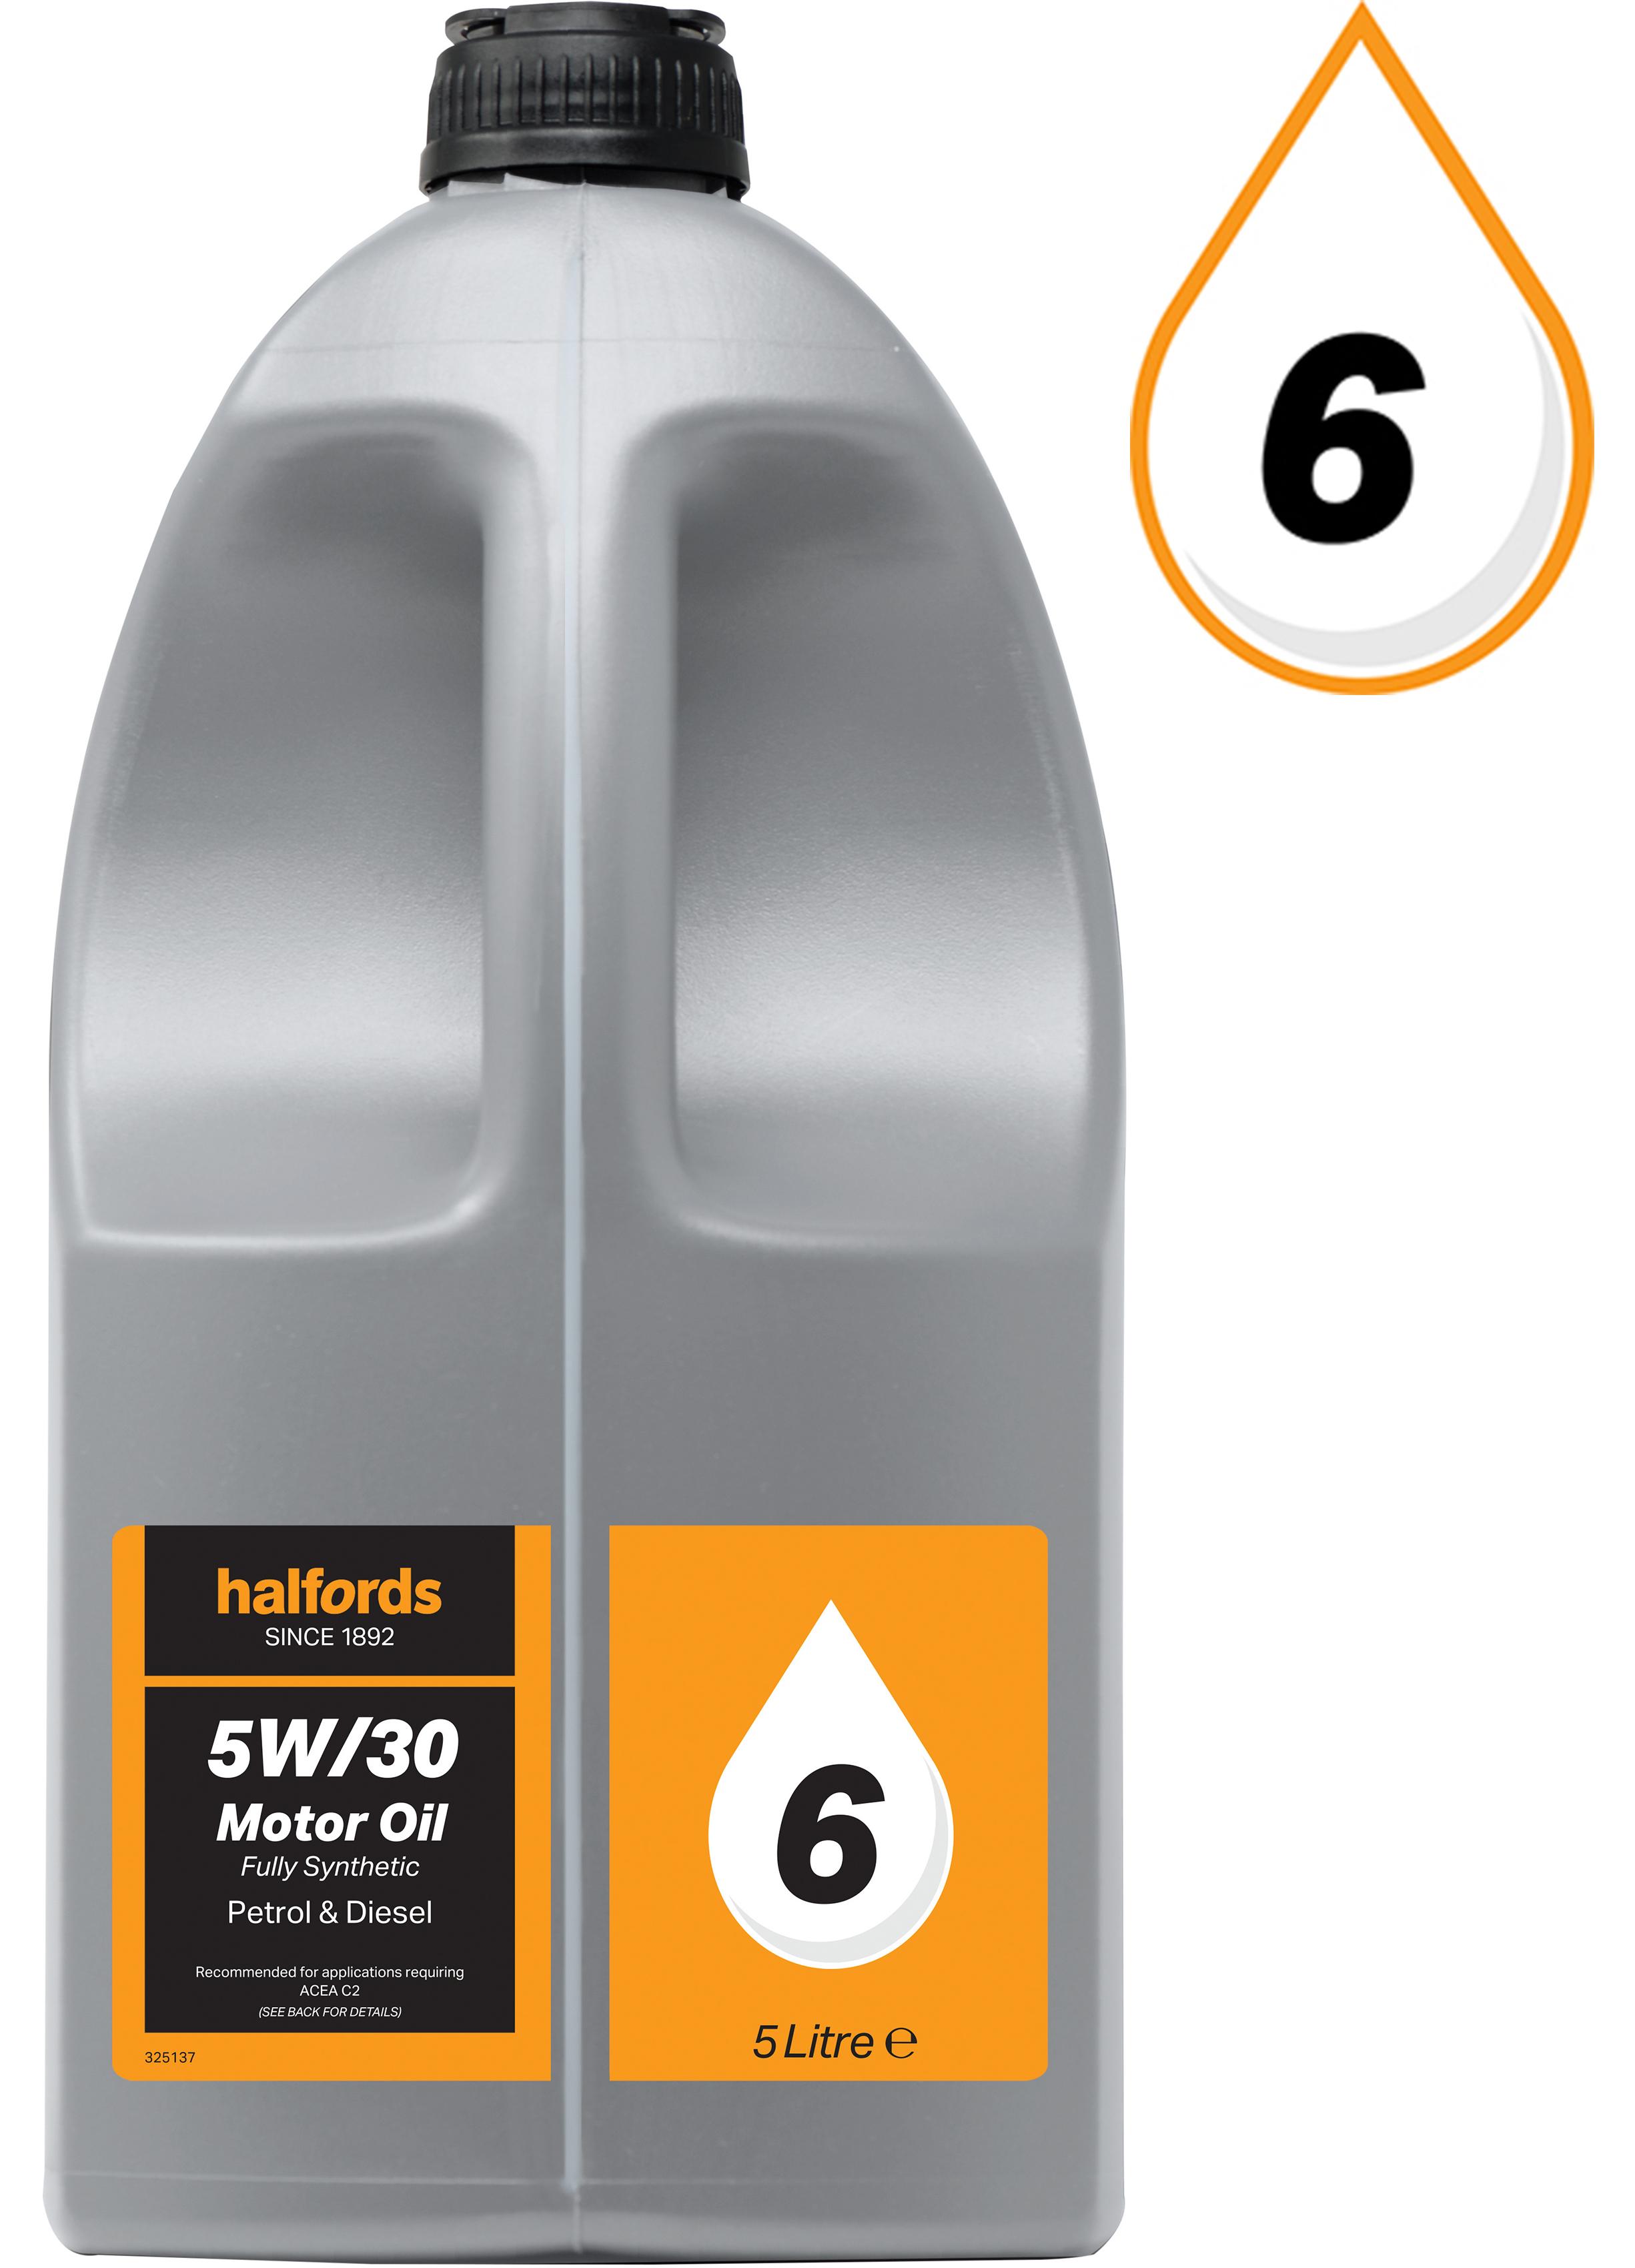 Halfords 5W30 Fully Synthetic Oil 6 - 5 Litres